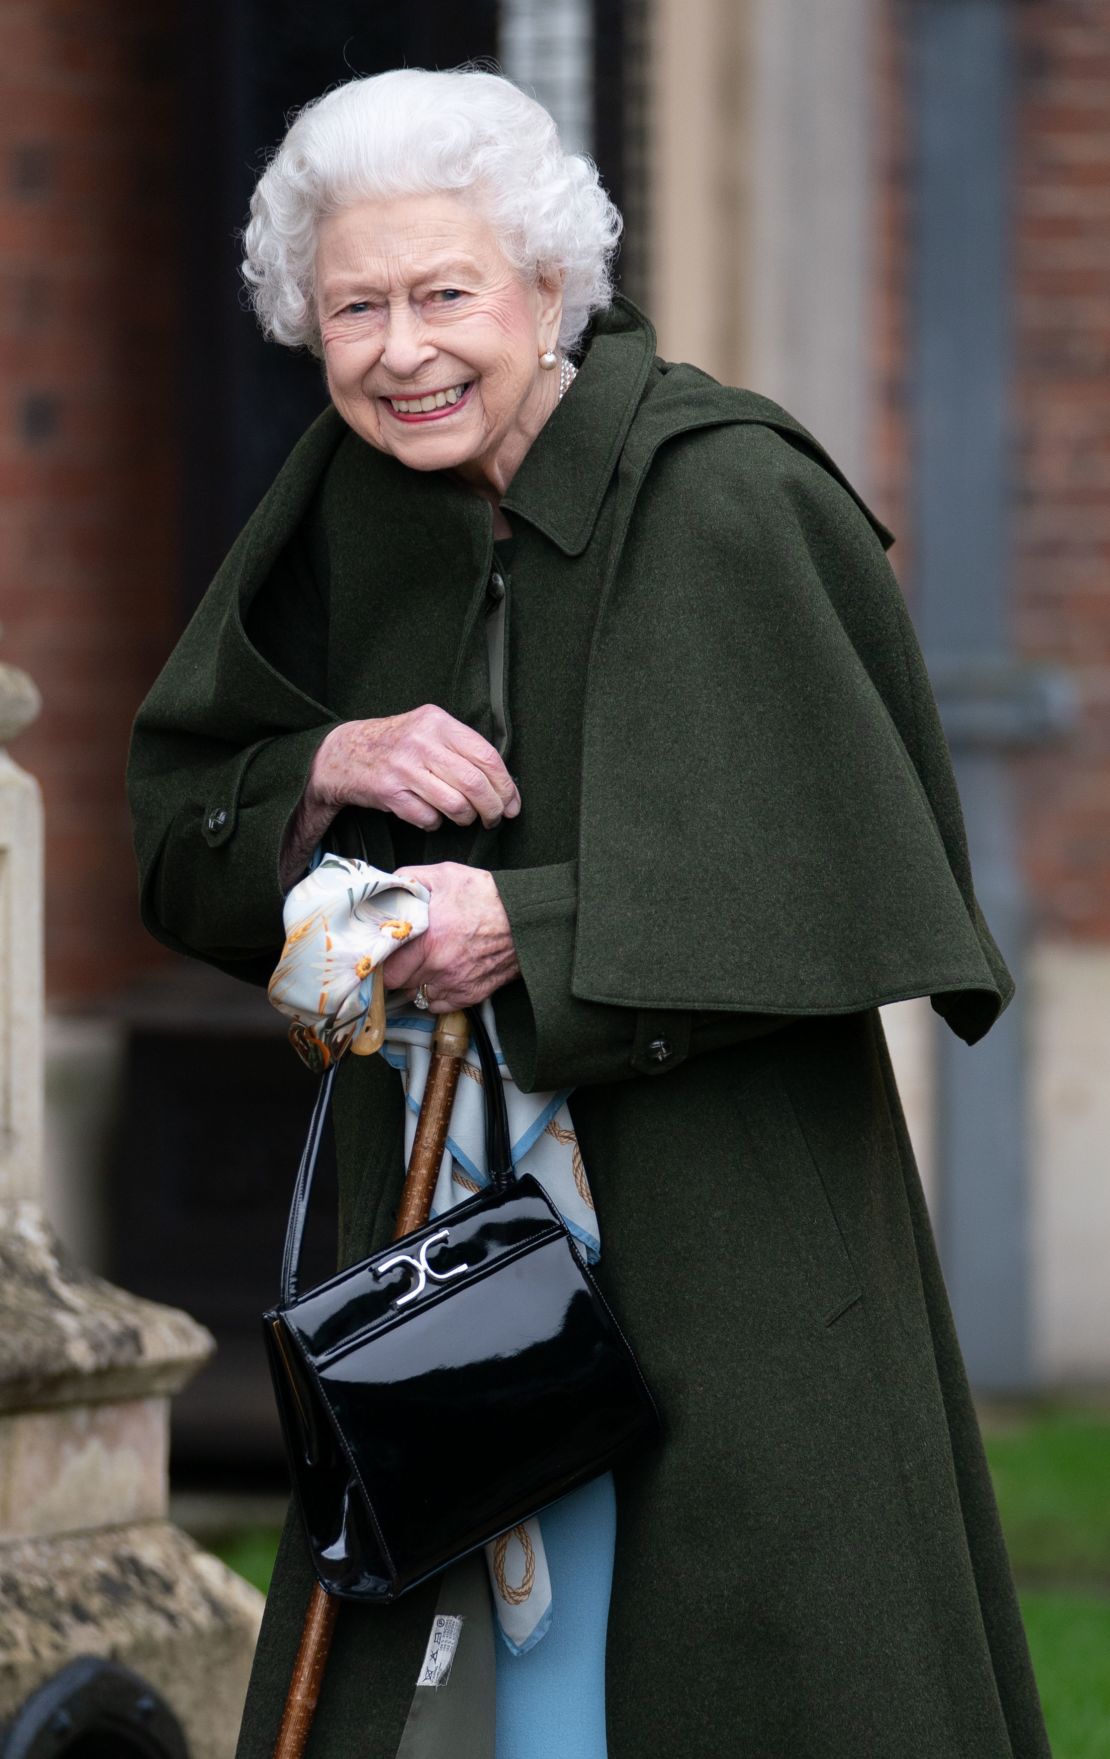 The Queen leaves Sandringham House on February 5, after a reception to celebrate the start of the Platinum Jubilee.